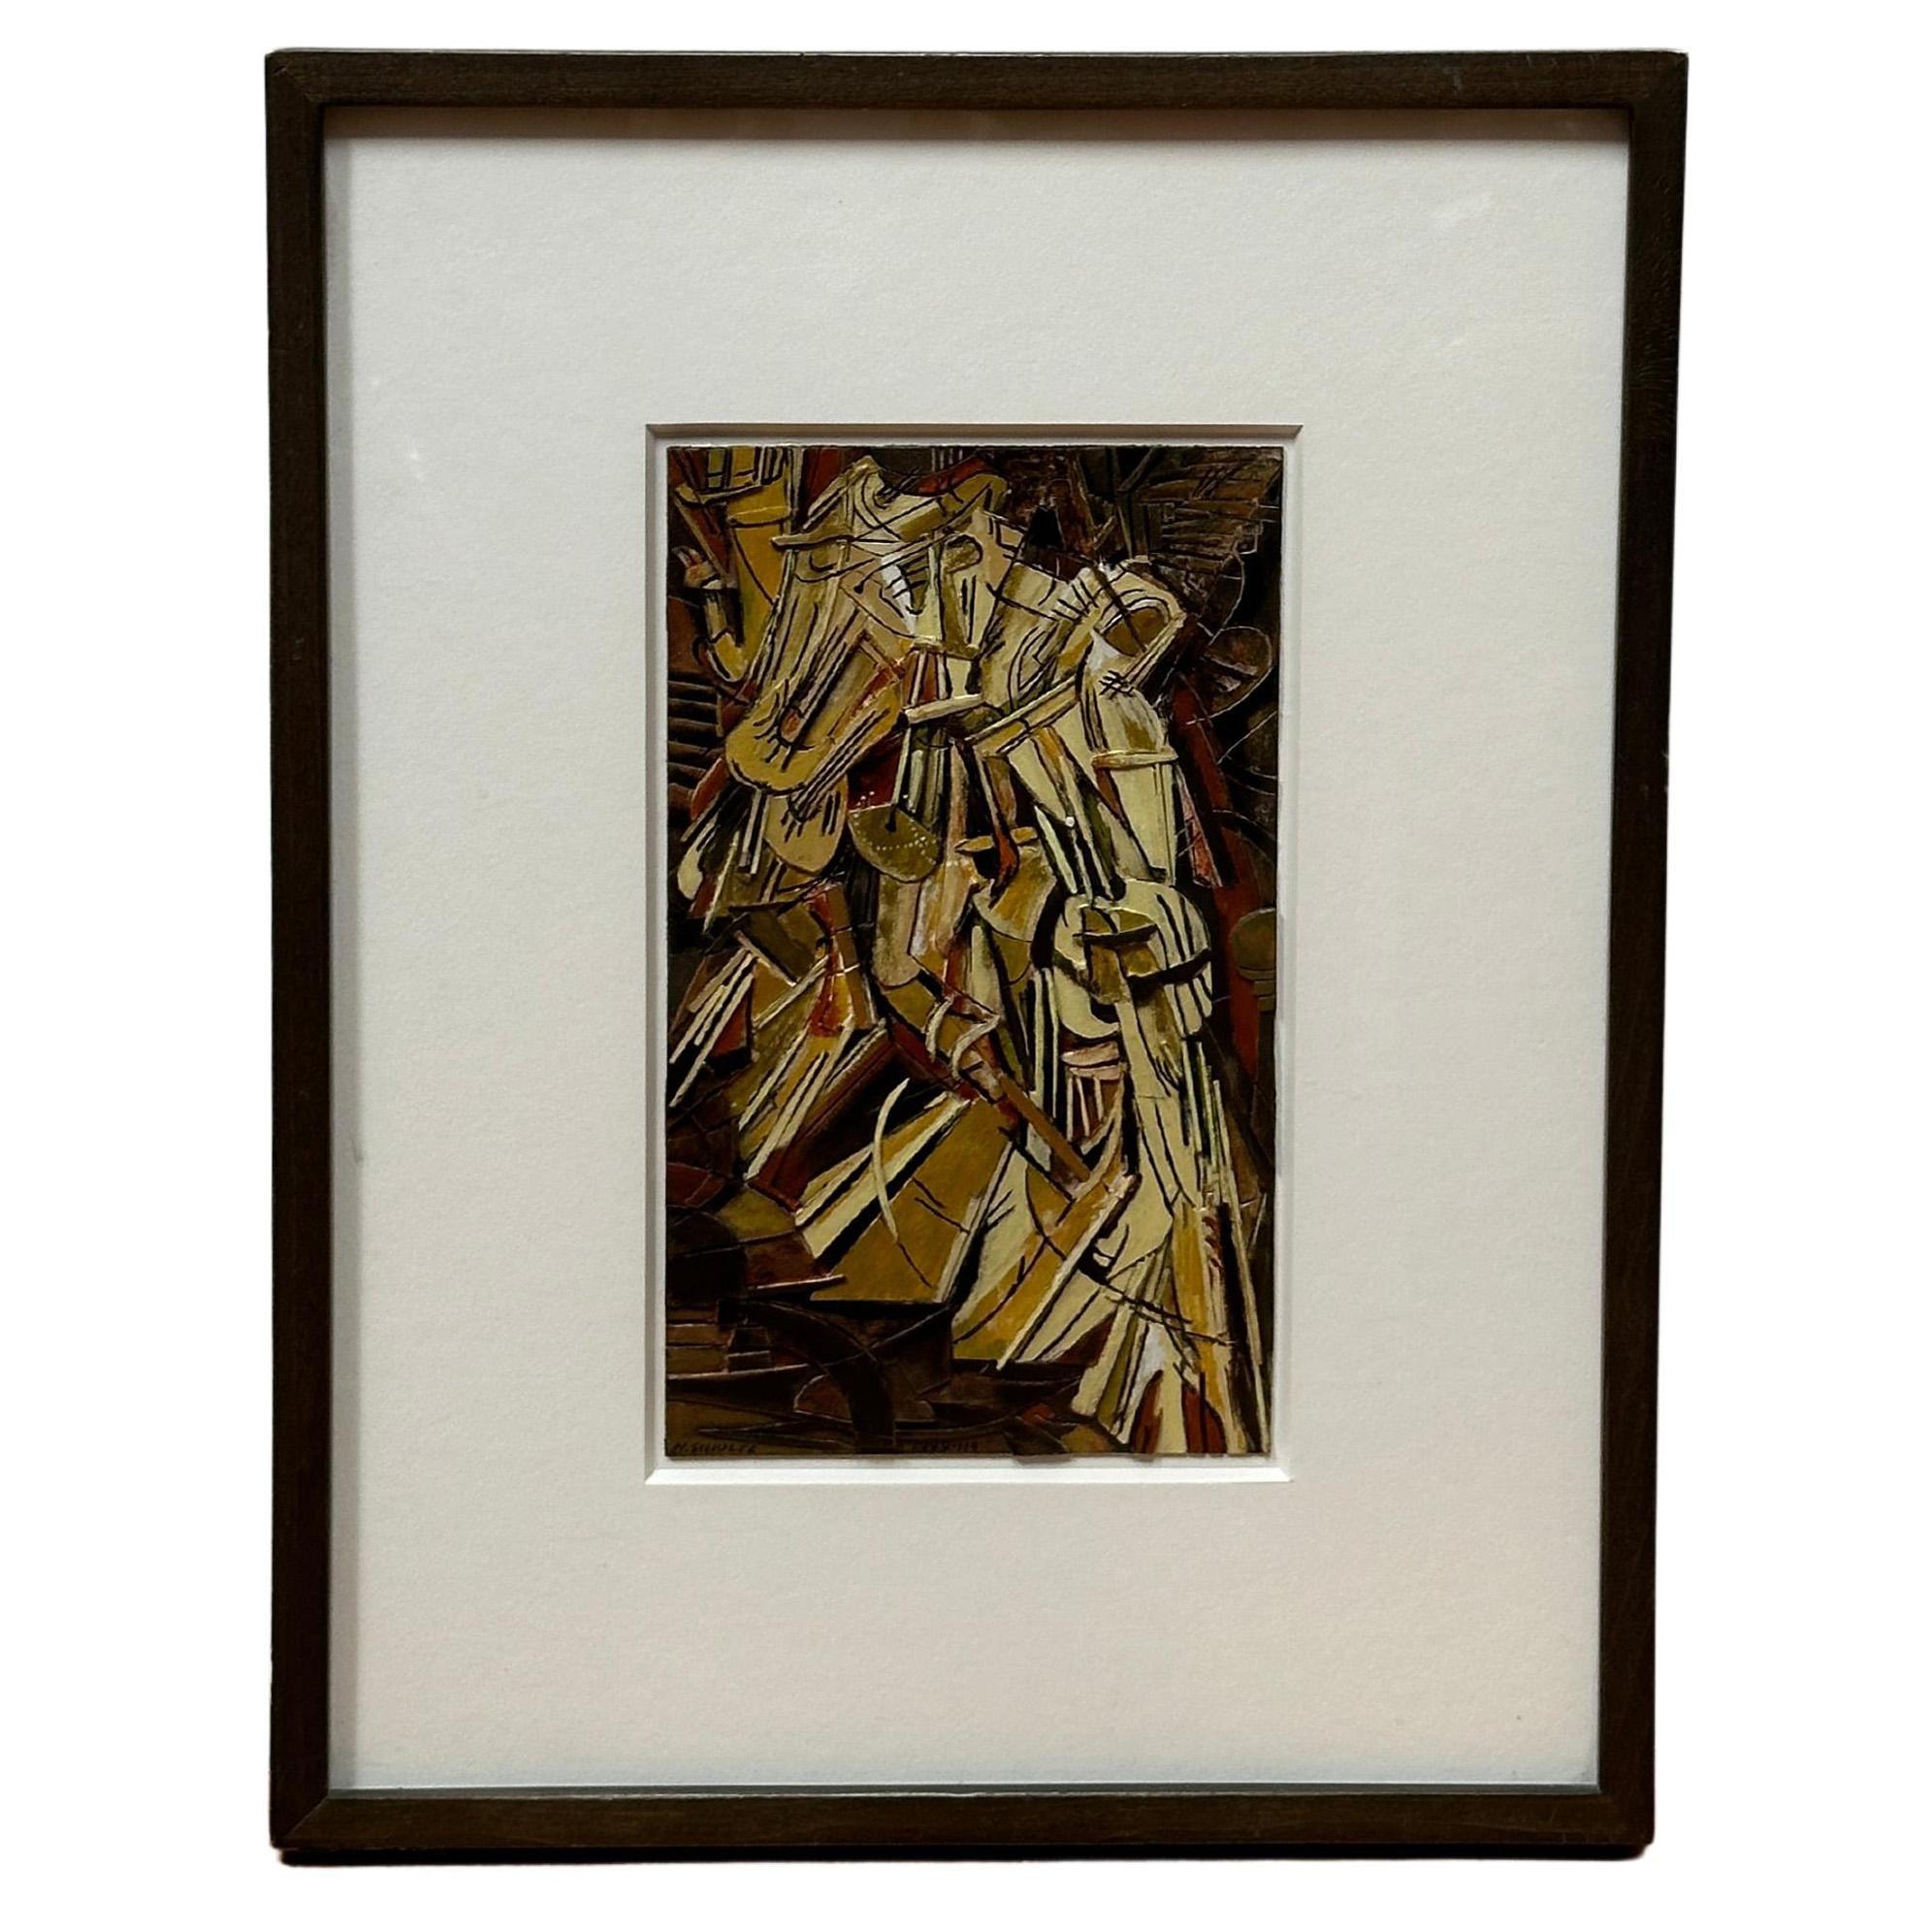 Oil, Wood and Straw Mixed Media signed N. Schultz after Marcel Duchamp - Mixed Media Art by (after) Marcel Duchamp